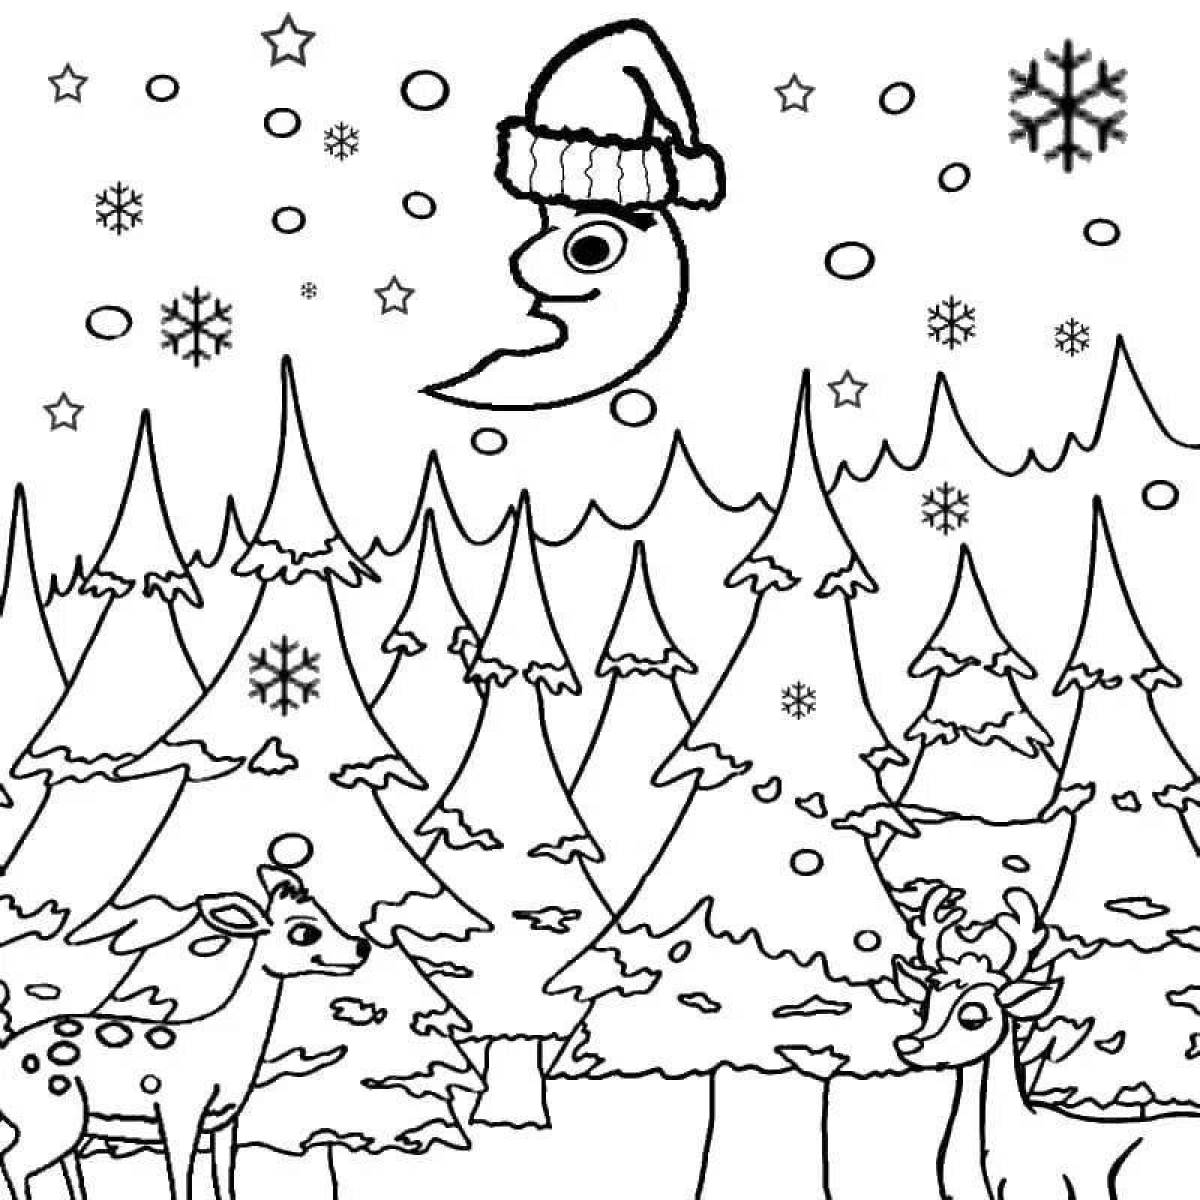 Serene winter forest coloring book for 4-5 year olds